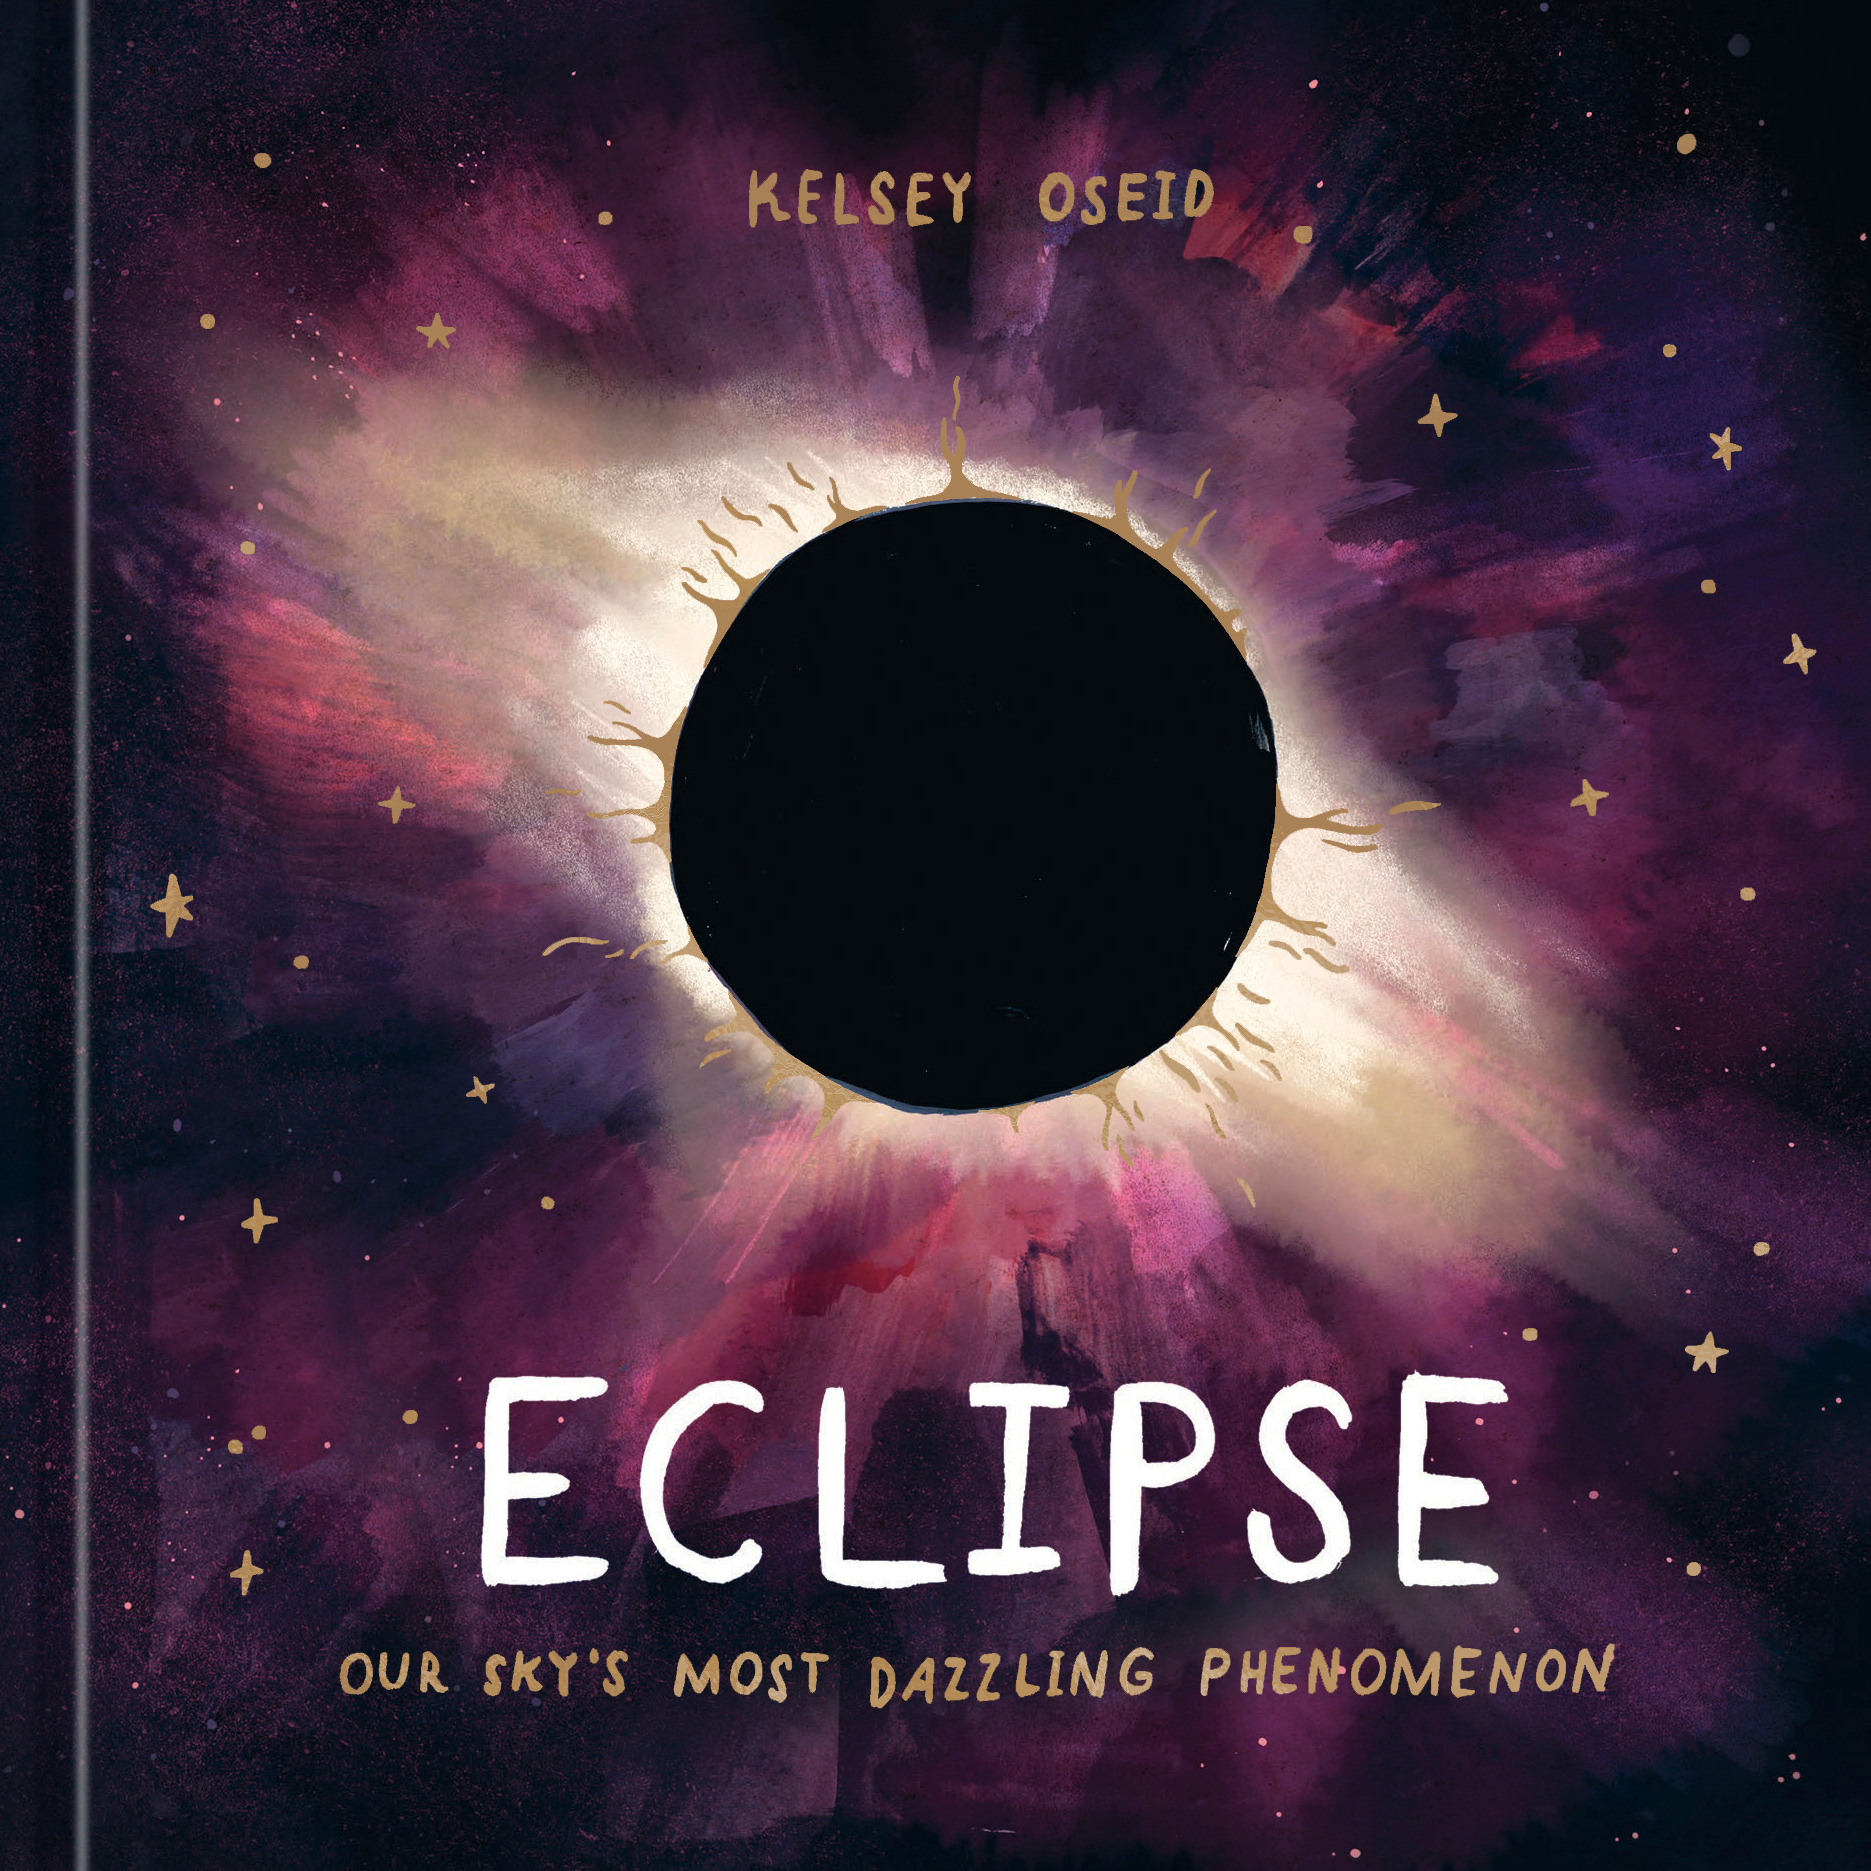 ECLIPSE: OUR SKY'S MOST DAZZLING PHENOMENON, by OSEID, KELSEY